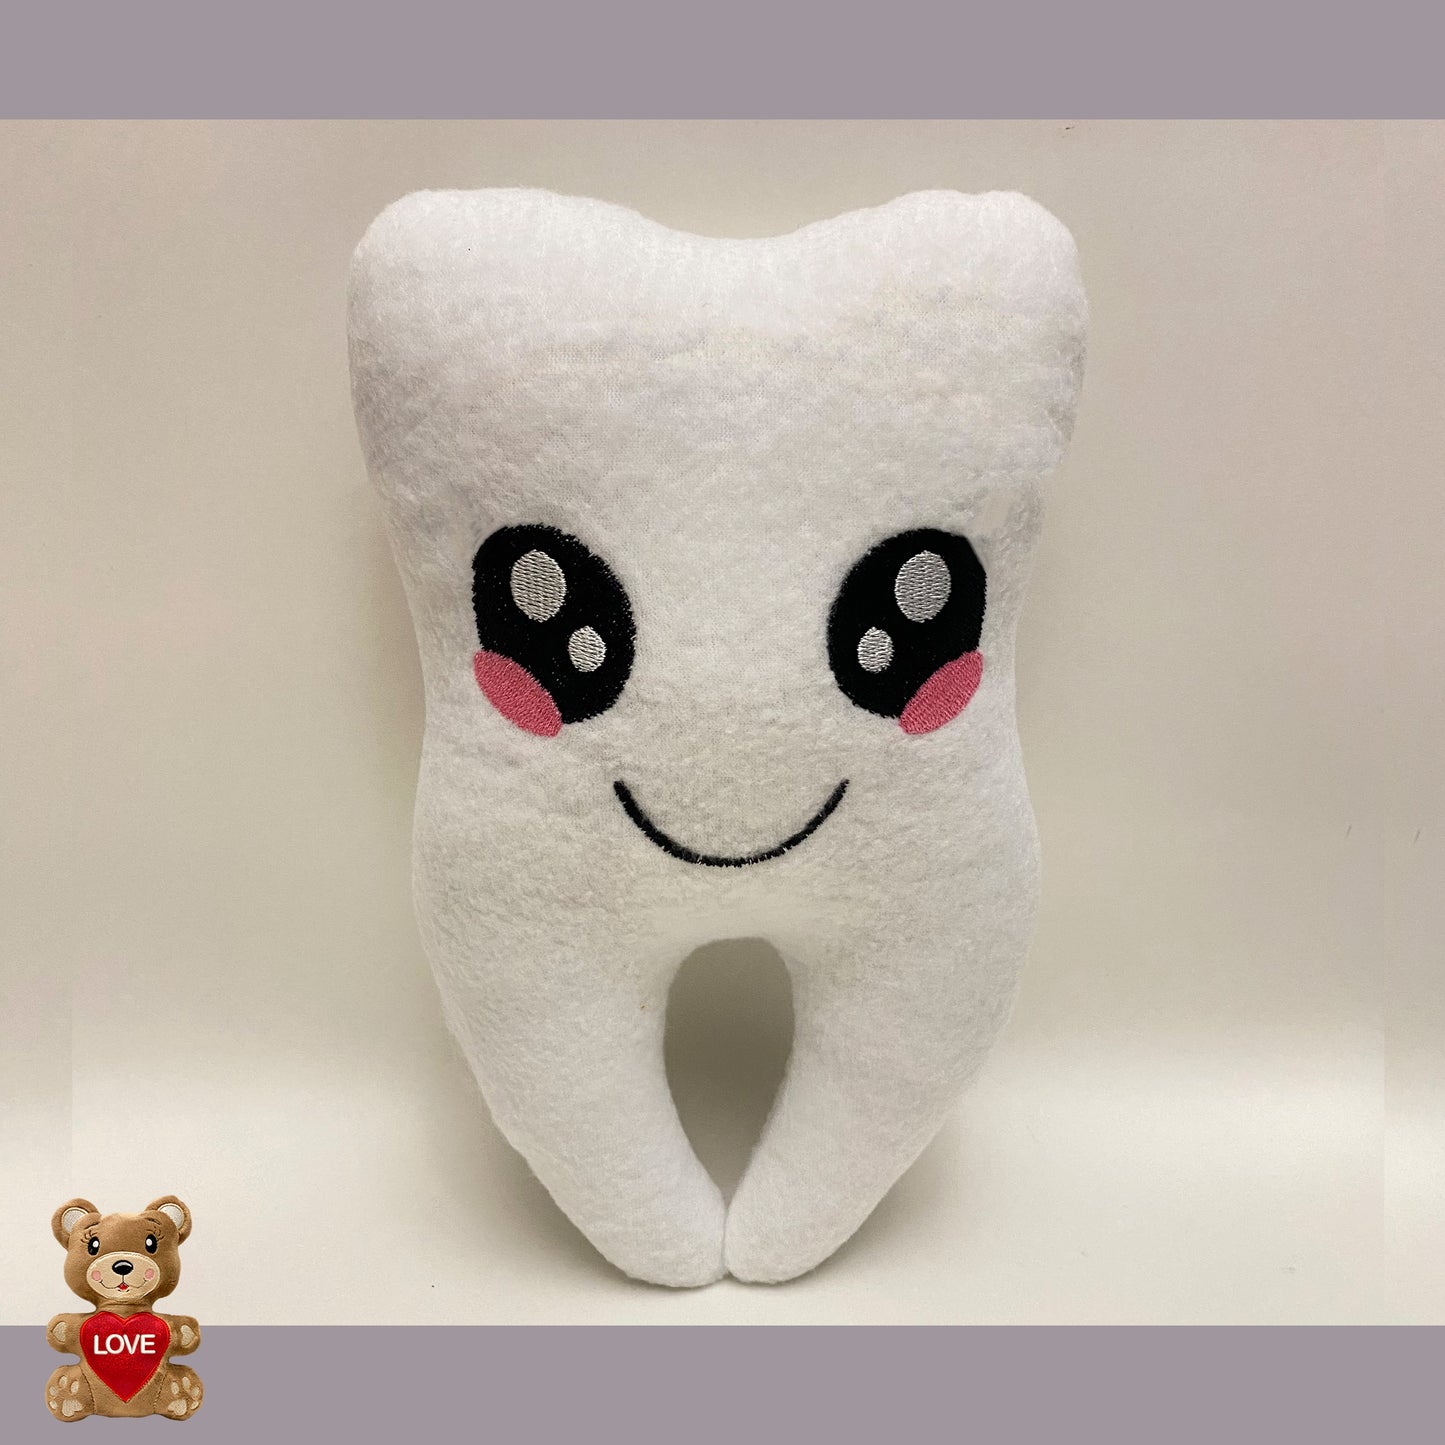 Personalised embroidery Plush Soft Toy Tooth ,Super cute personalised soft plush toy, Personalised Gift, Unique Personalized Birthday Gifts , Custom Gifts For Children